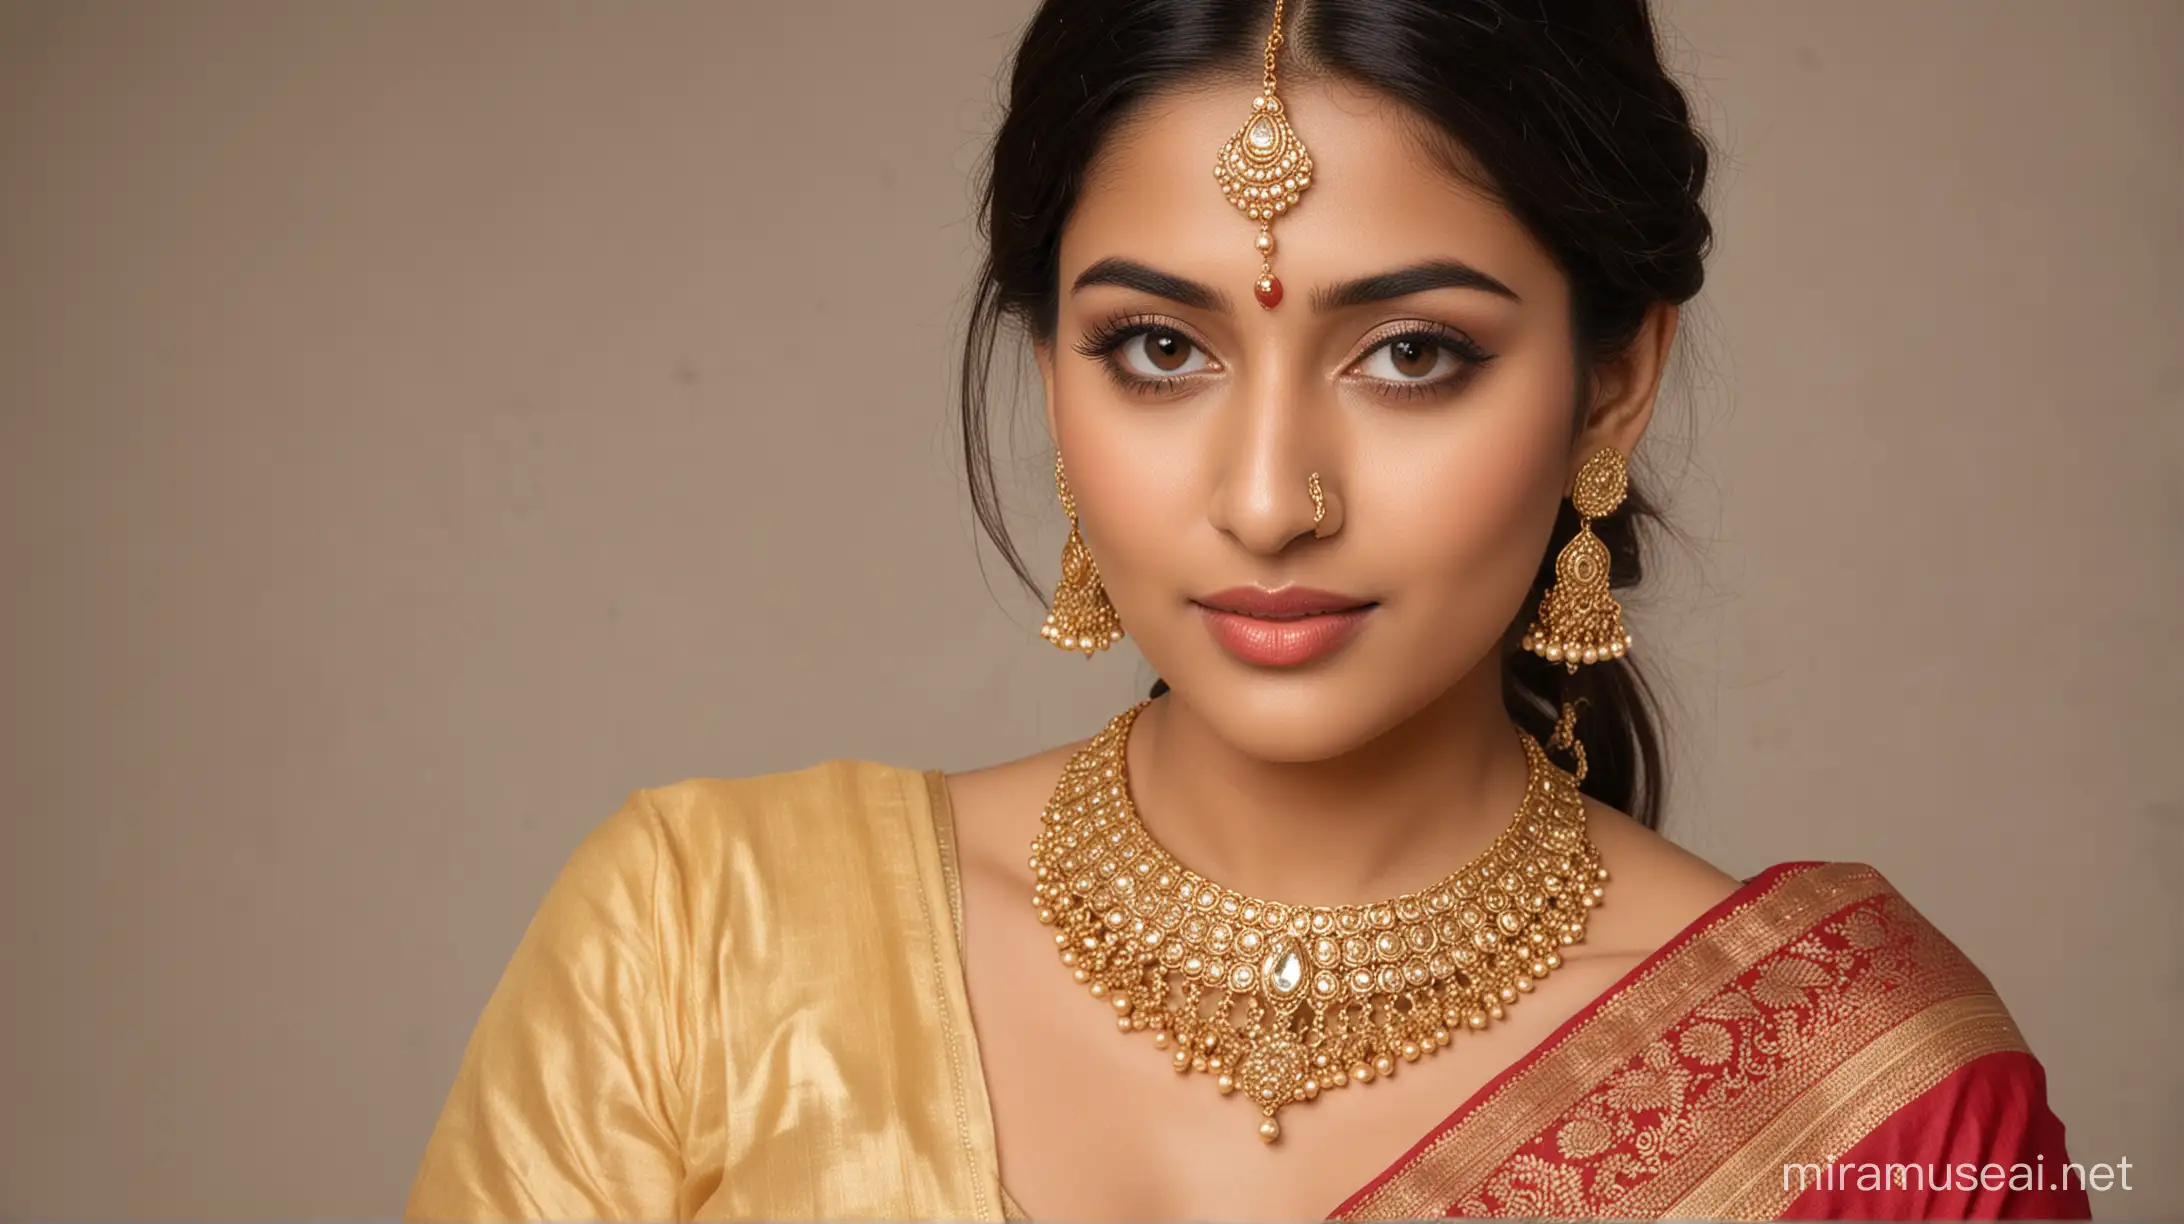 Indian Women Adorned in Gold Jewelry and Sarees